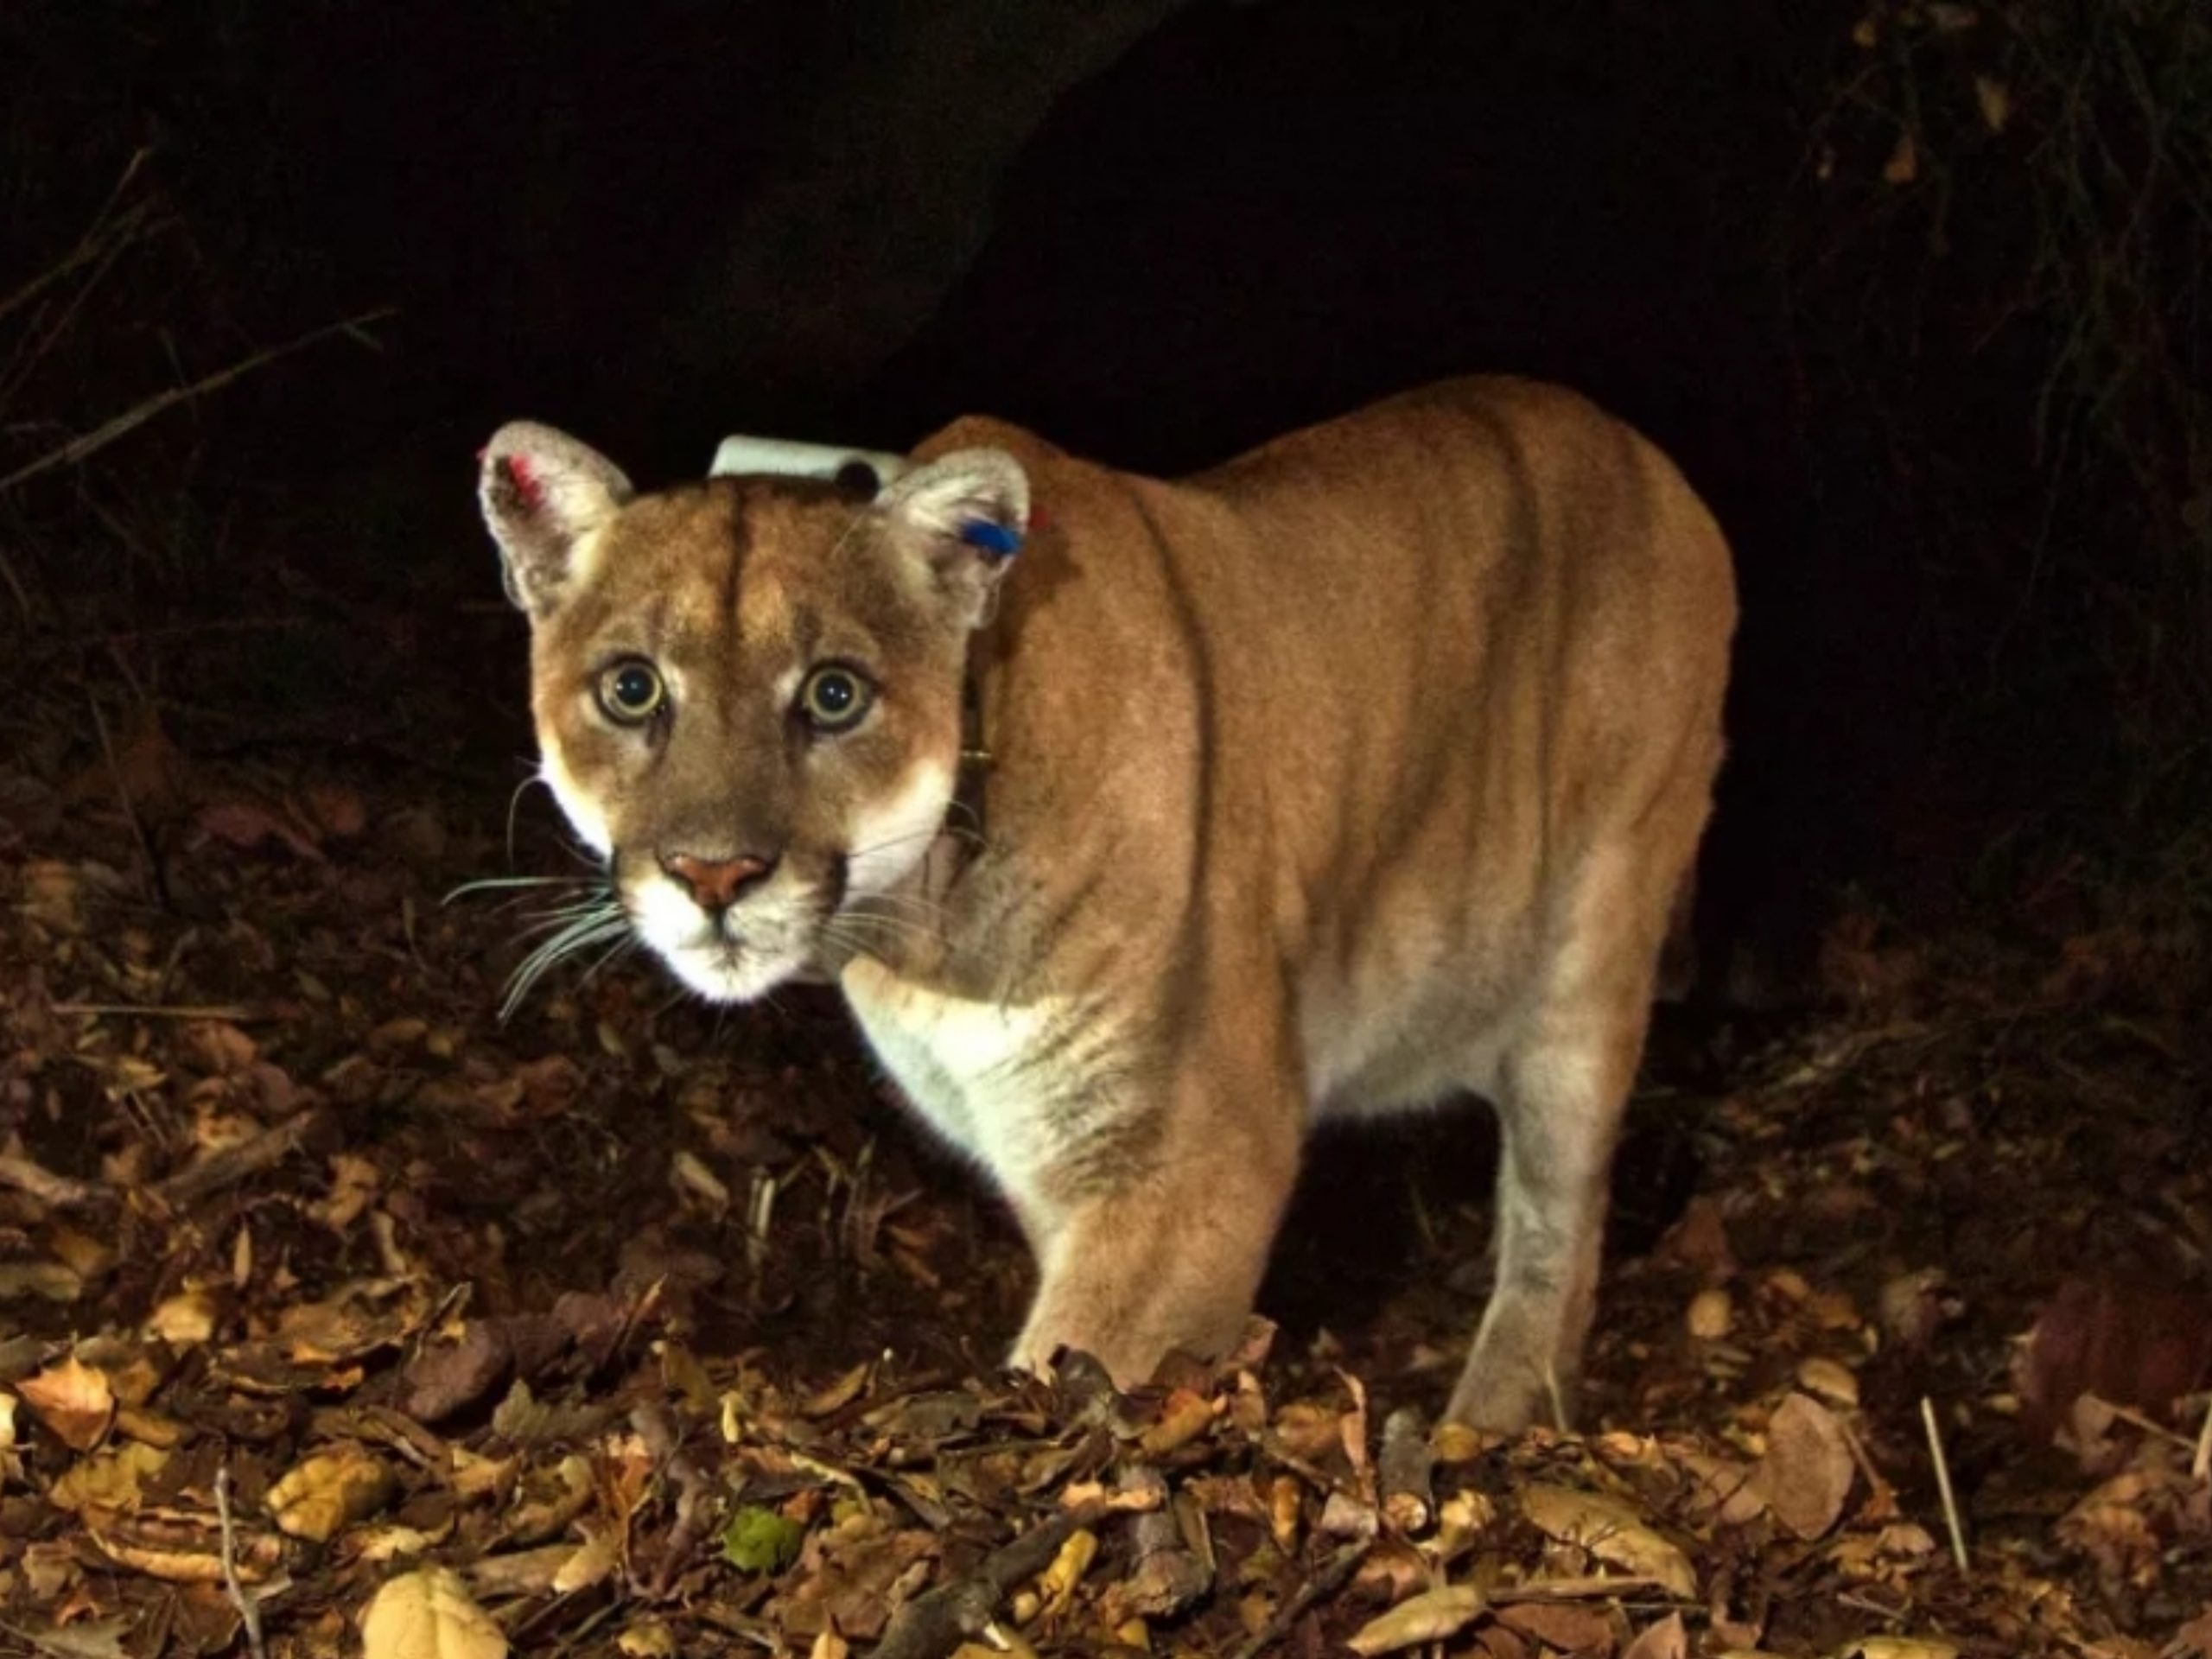 P-22, Los Angeles’ Famous Mountain Lion, Has Been Euthanized